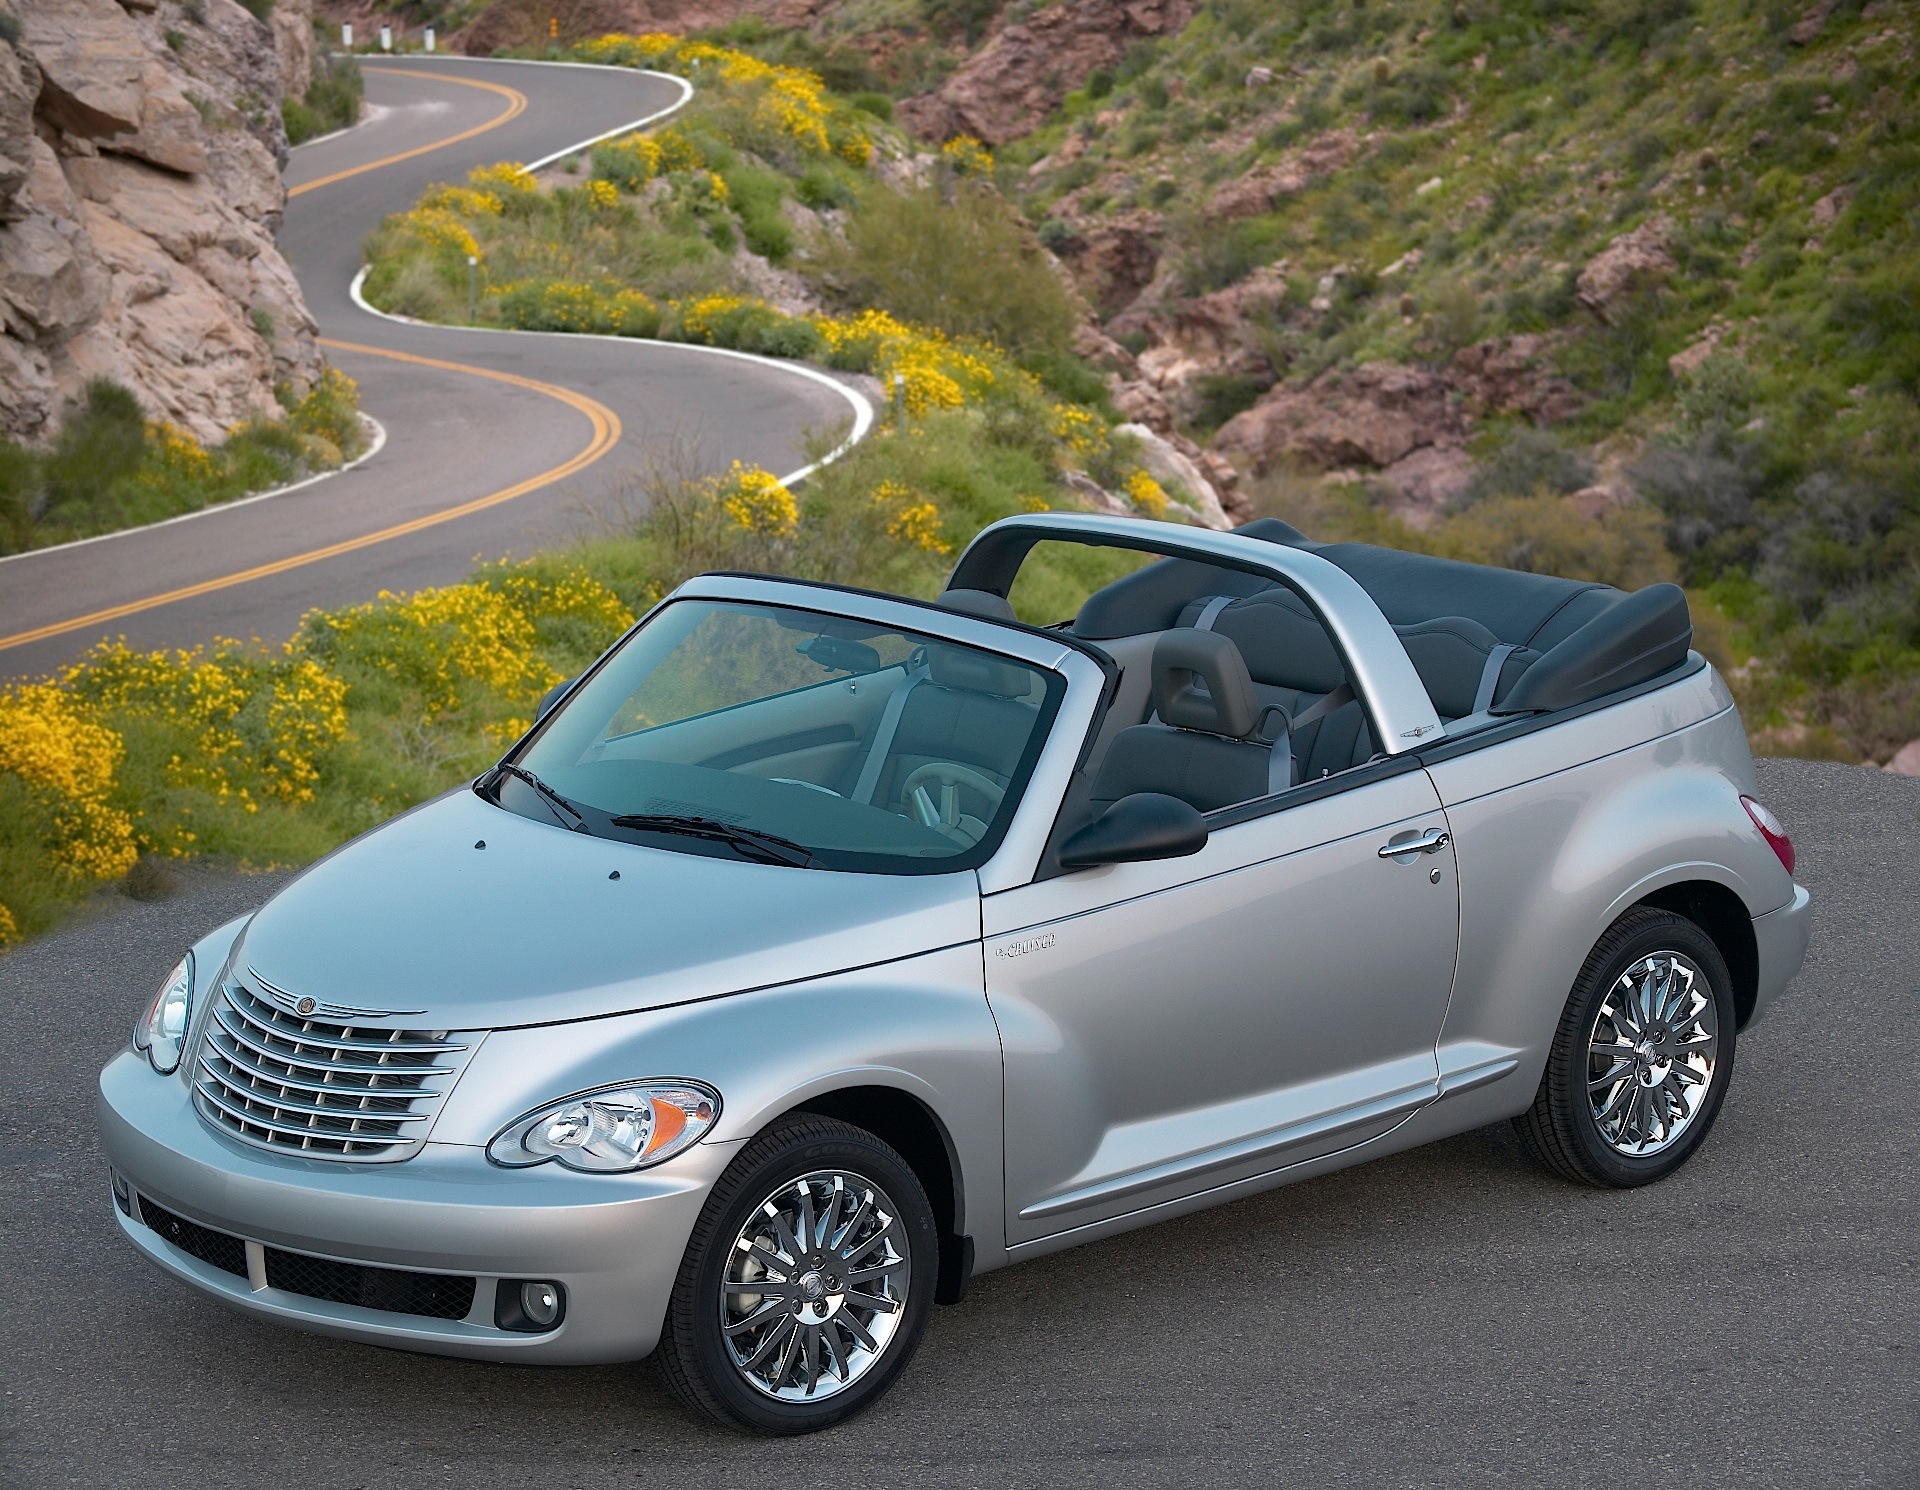 Details about   2006 06 Chrysler Touring Edition PT Cruiser Convertible Brochure 33 pgs BR107 